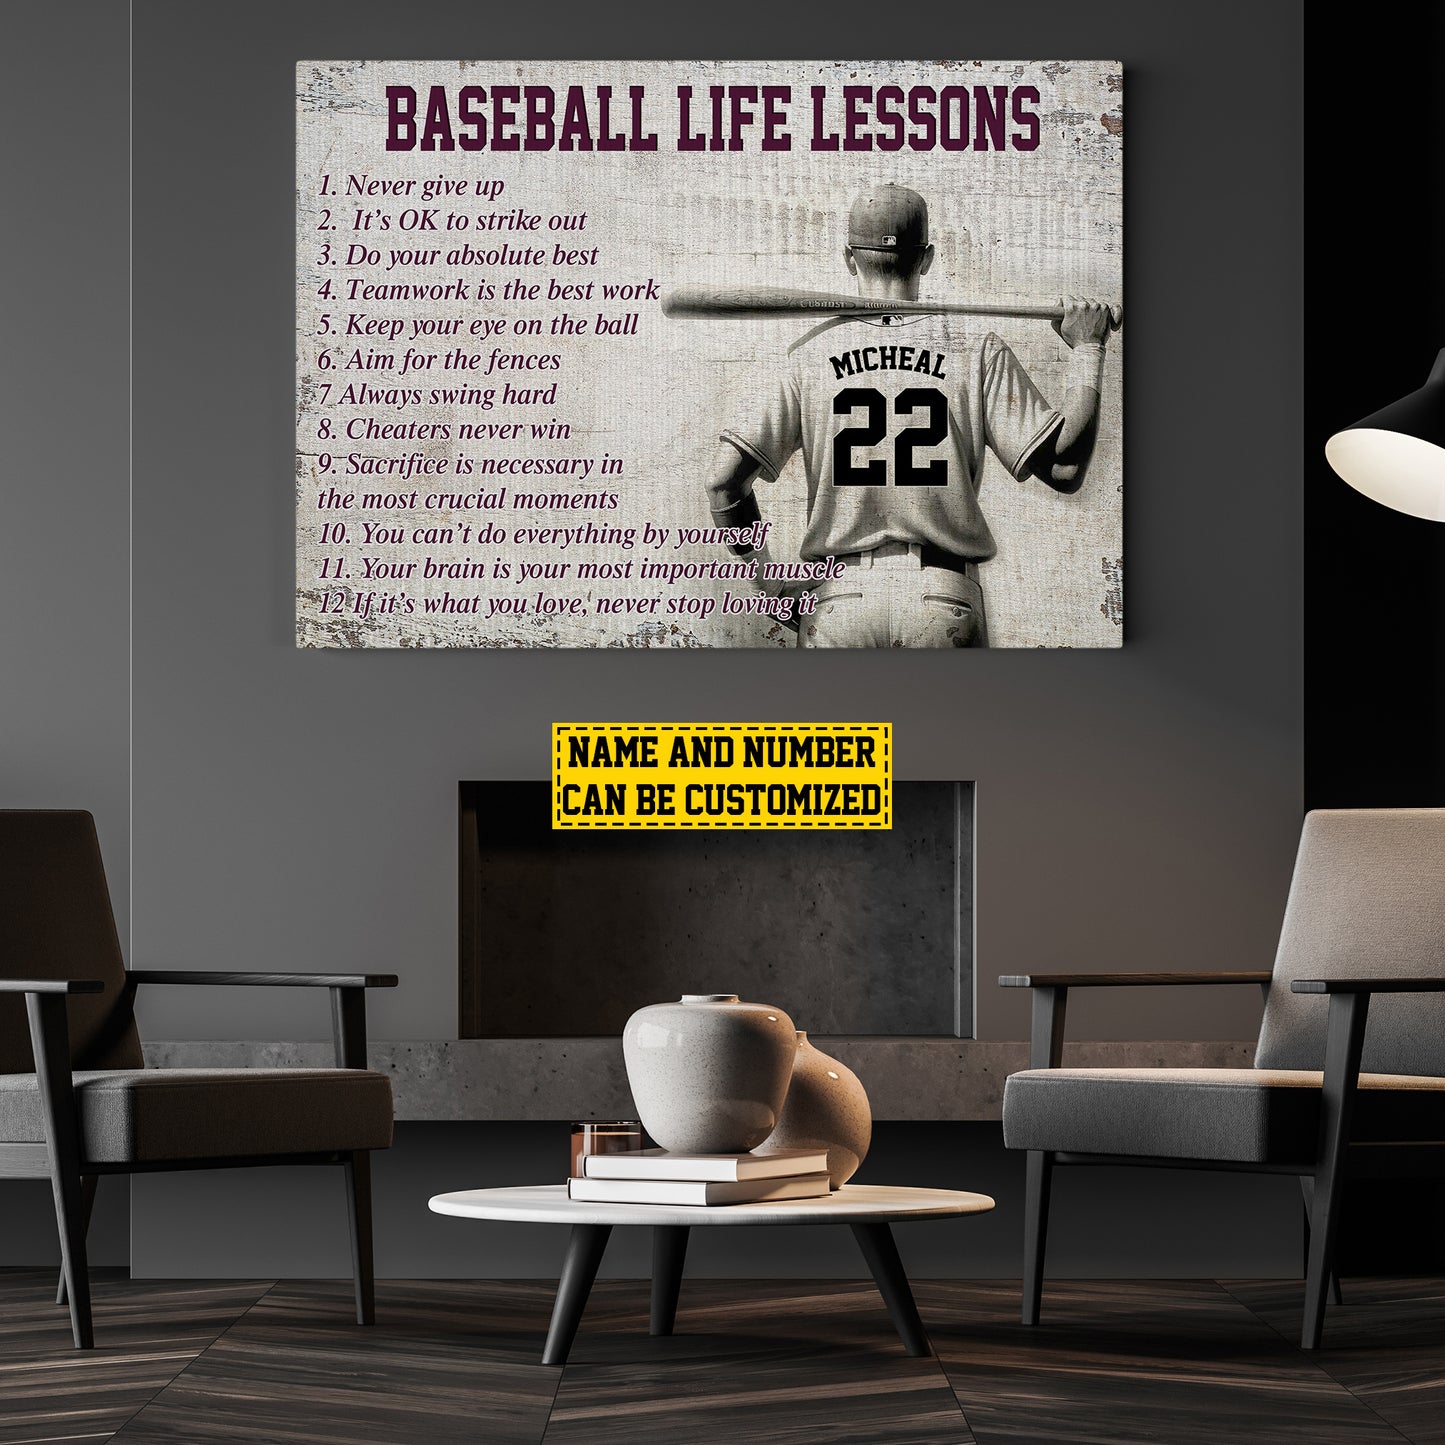 Baseball Life Lessons What You Love Never Stop, Personalized Motivational Baseball Canvas Painting, Inspirational Quotes Wall Art Decor, Poster Gift For Baseball Lovers